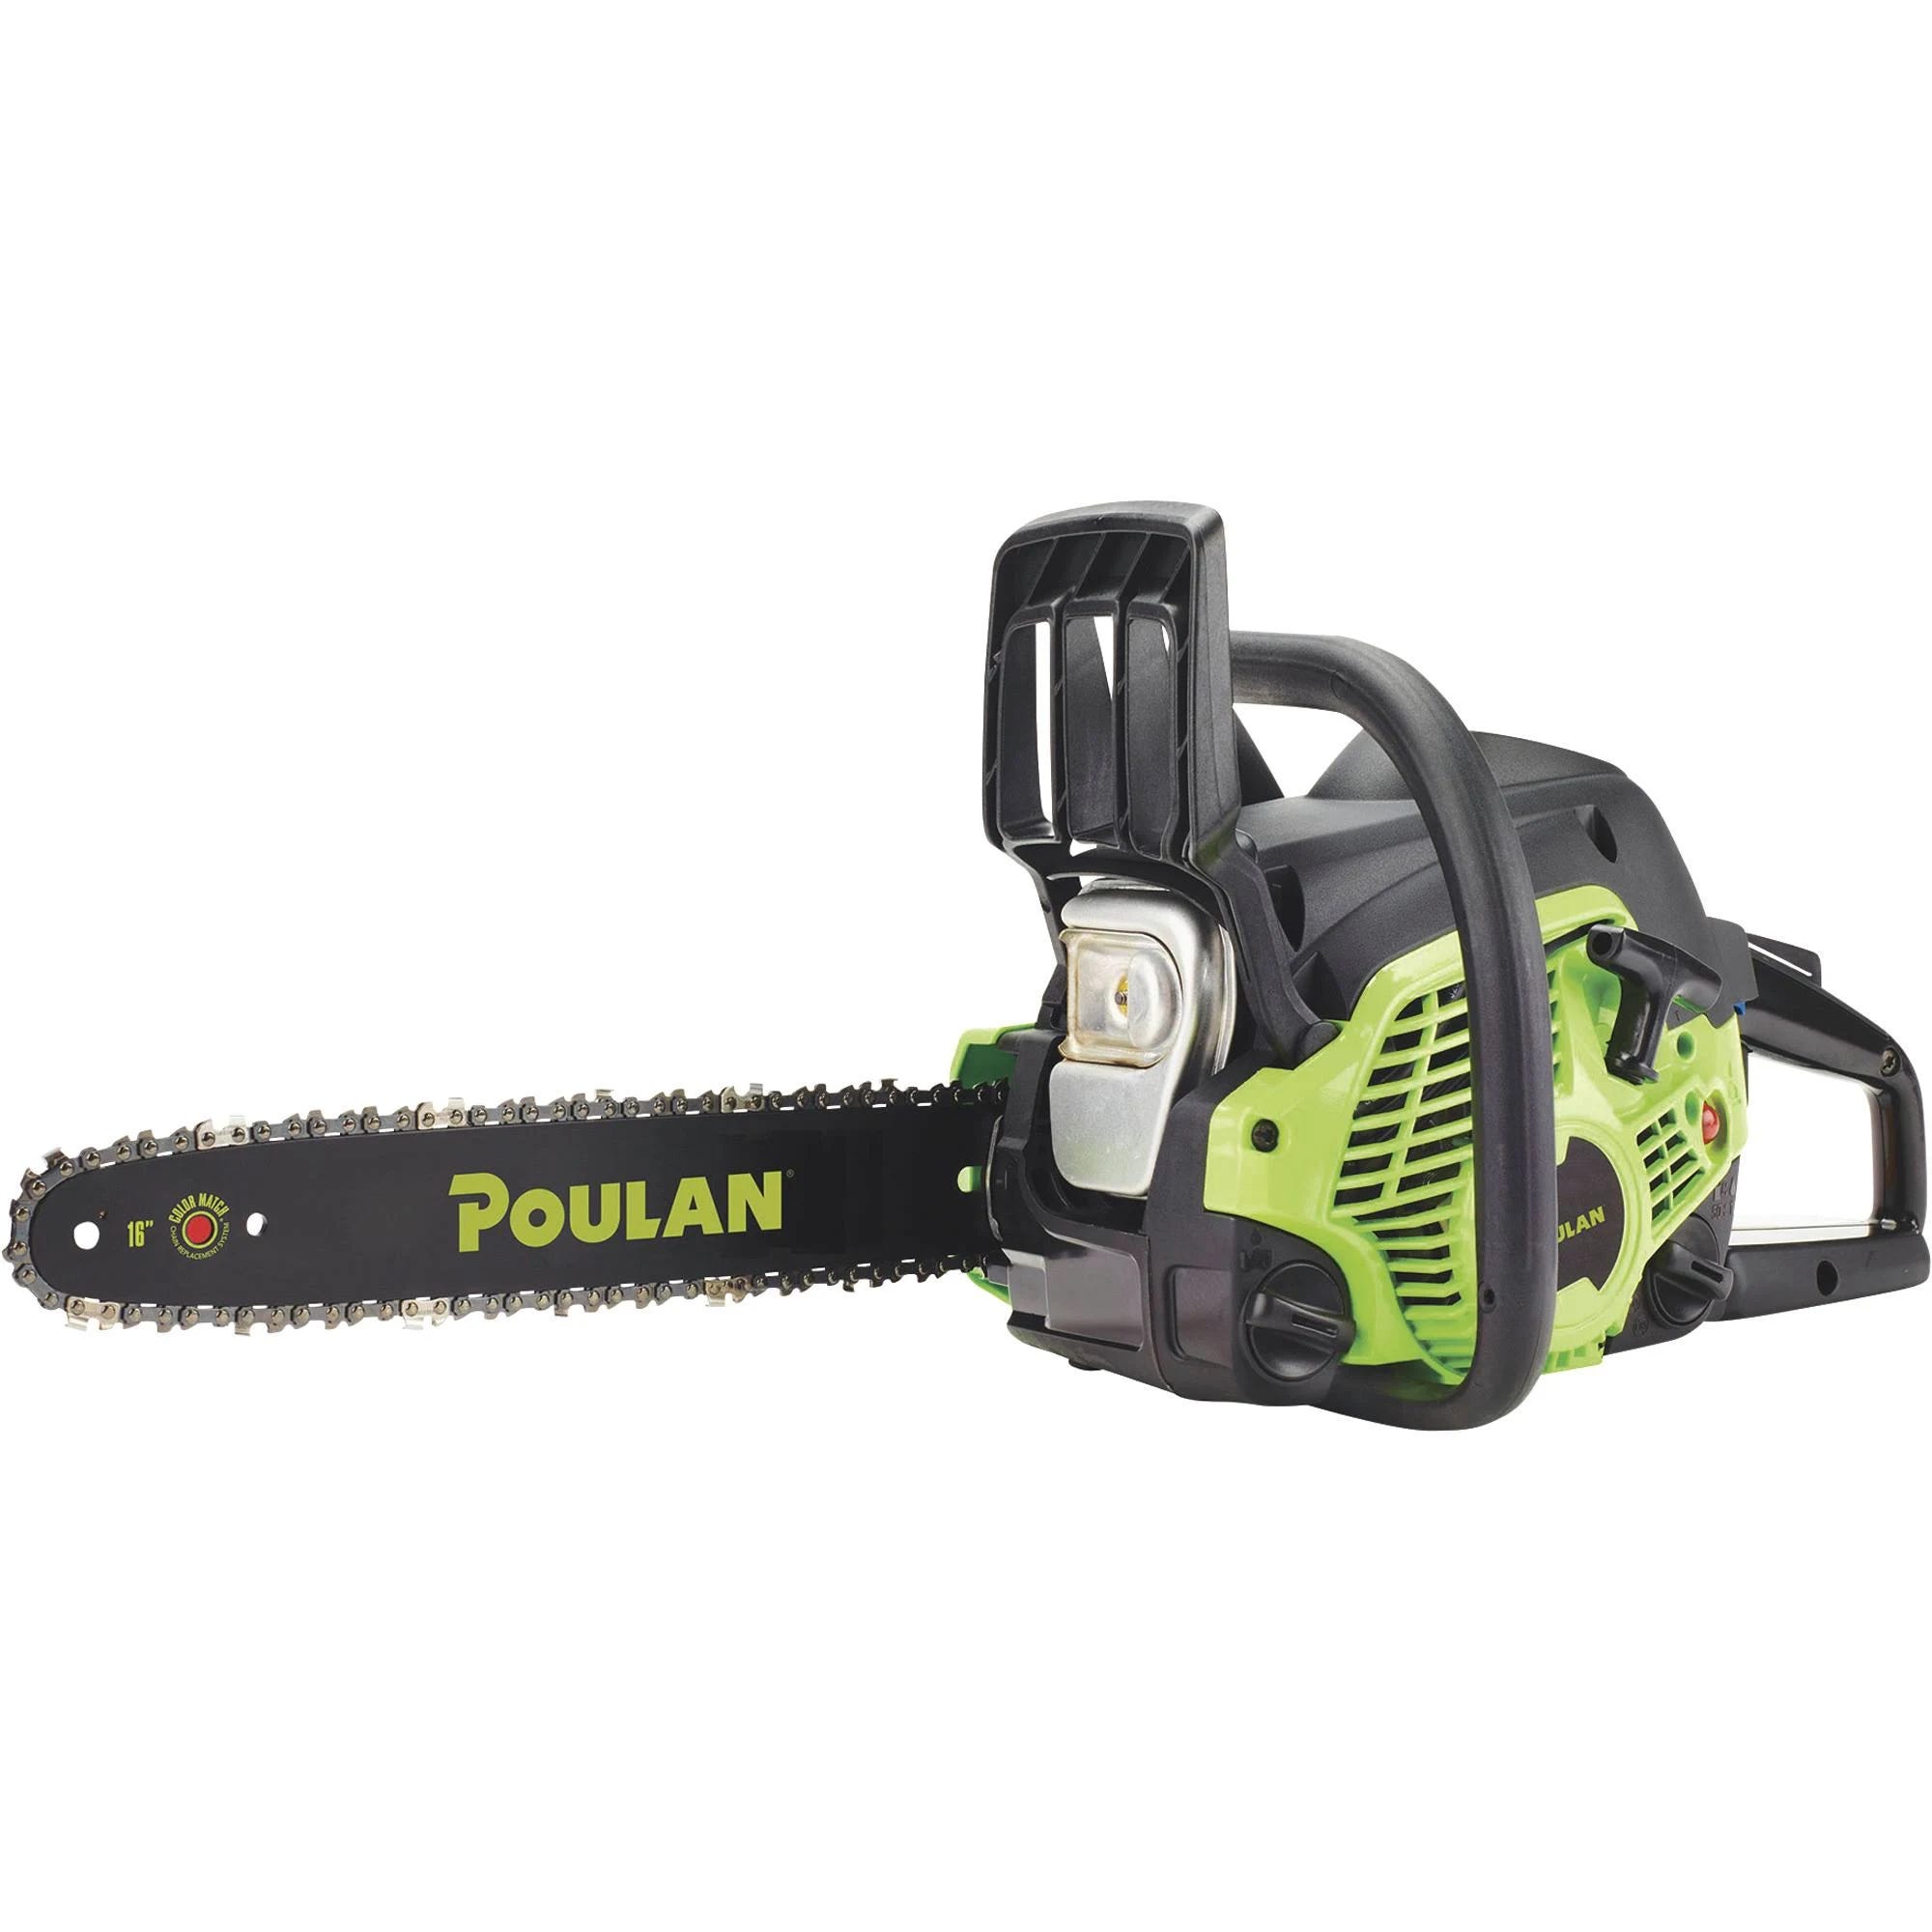 Poulan 16-inch Gas Chainsaw with OxyPower Technology - 38cc Engine | Image